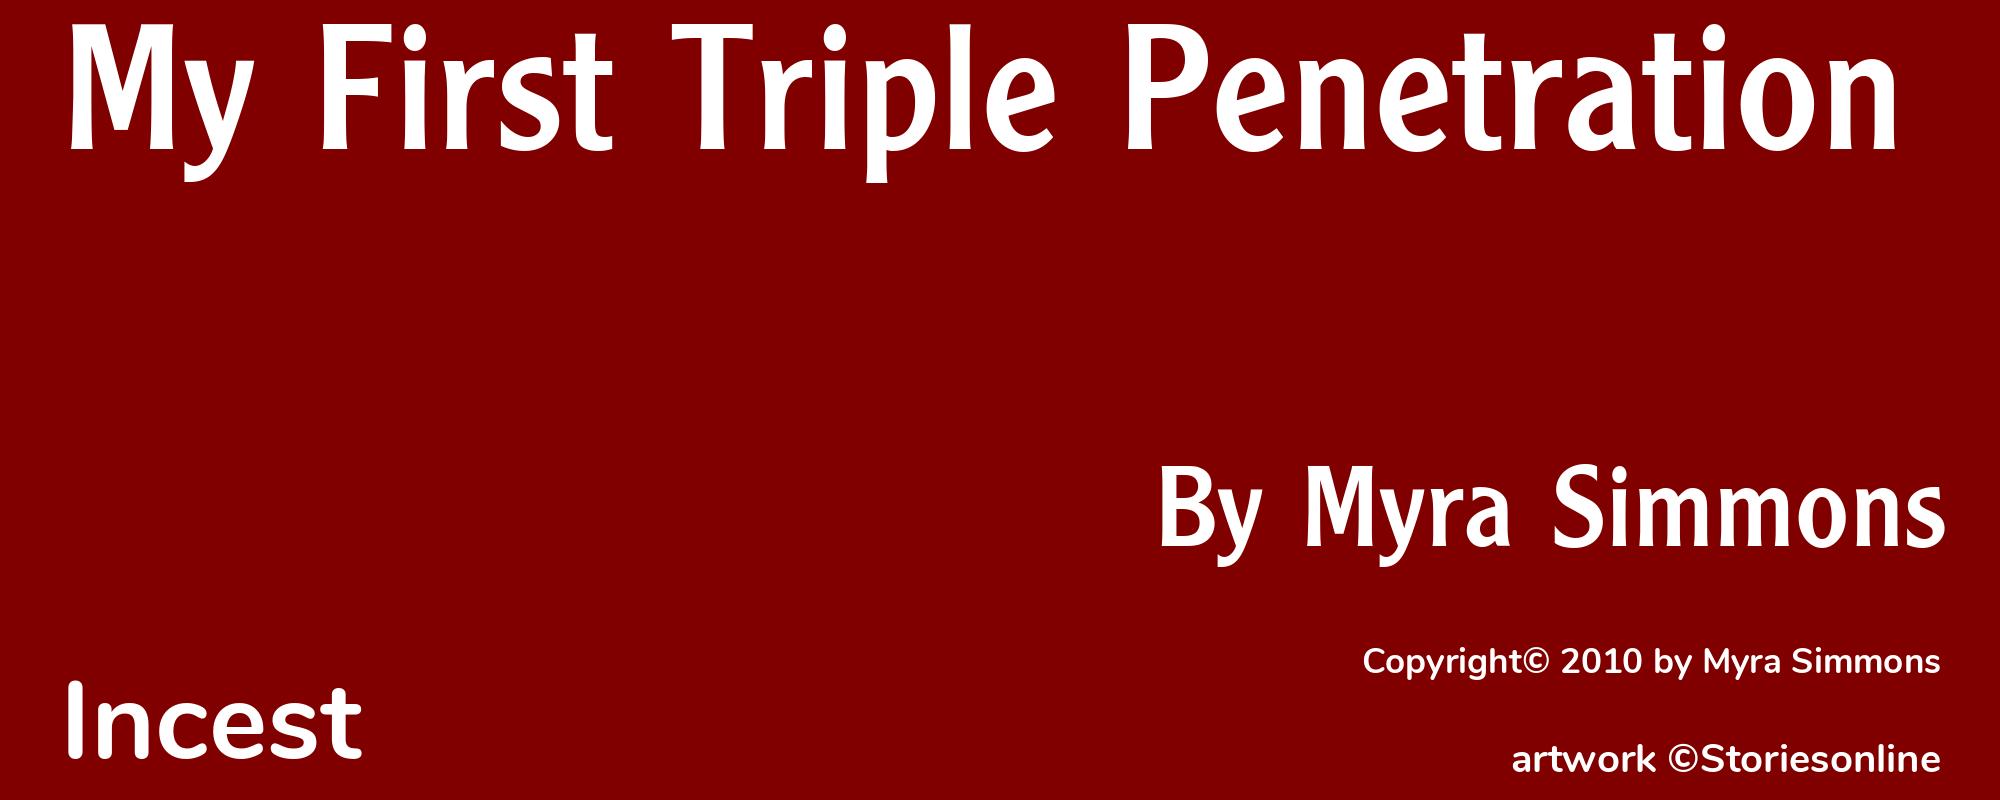 My First Triple Penetration - Cover